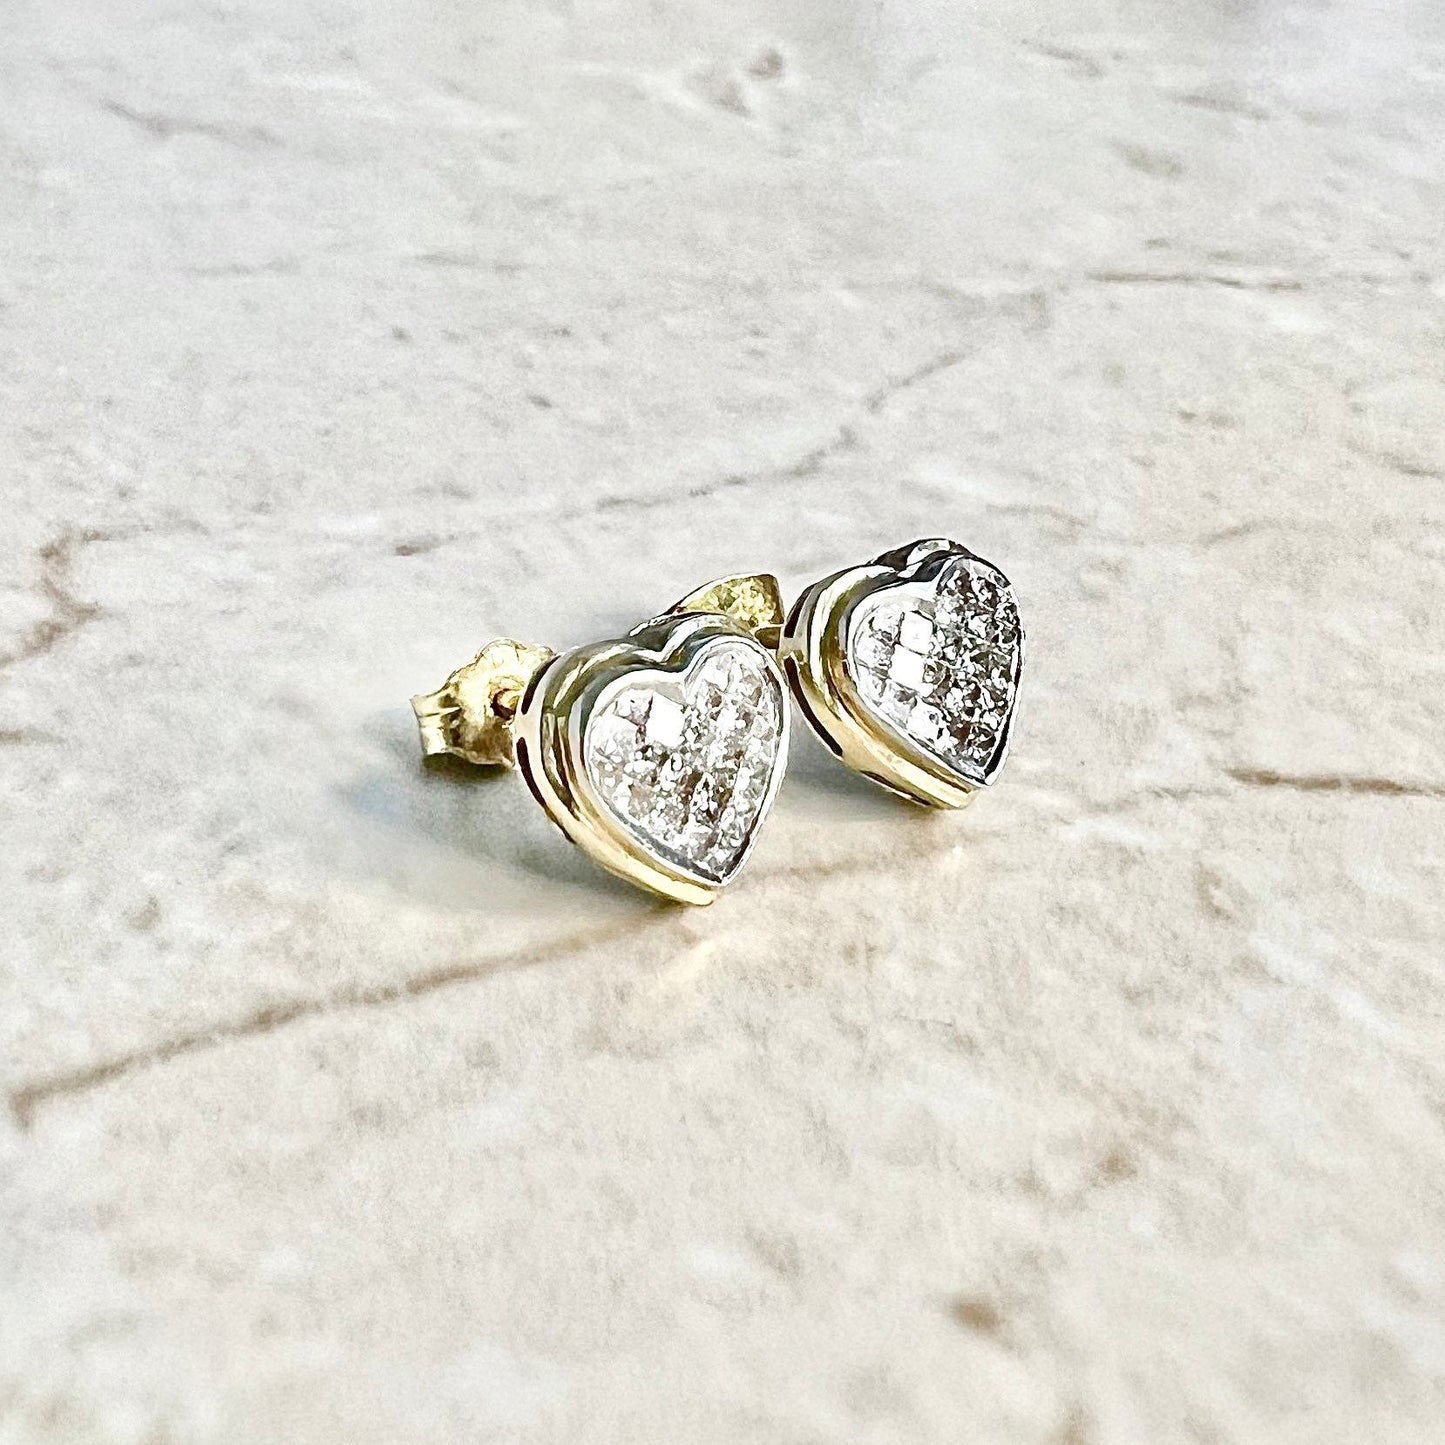 14K Diamond Cluster Stud Earrings - Two Tone Gold Diamond Studs - Diamond Heart Earrings - Diamond Earrings - Valentine’s Day Gifts For Her